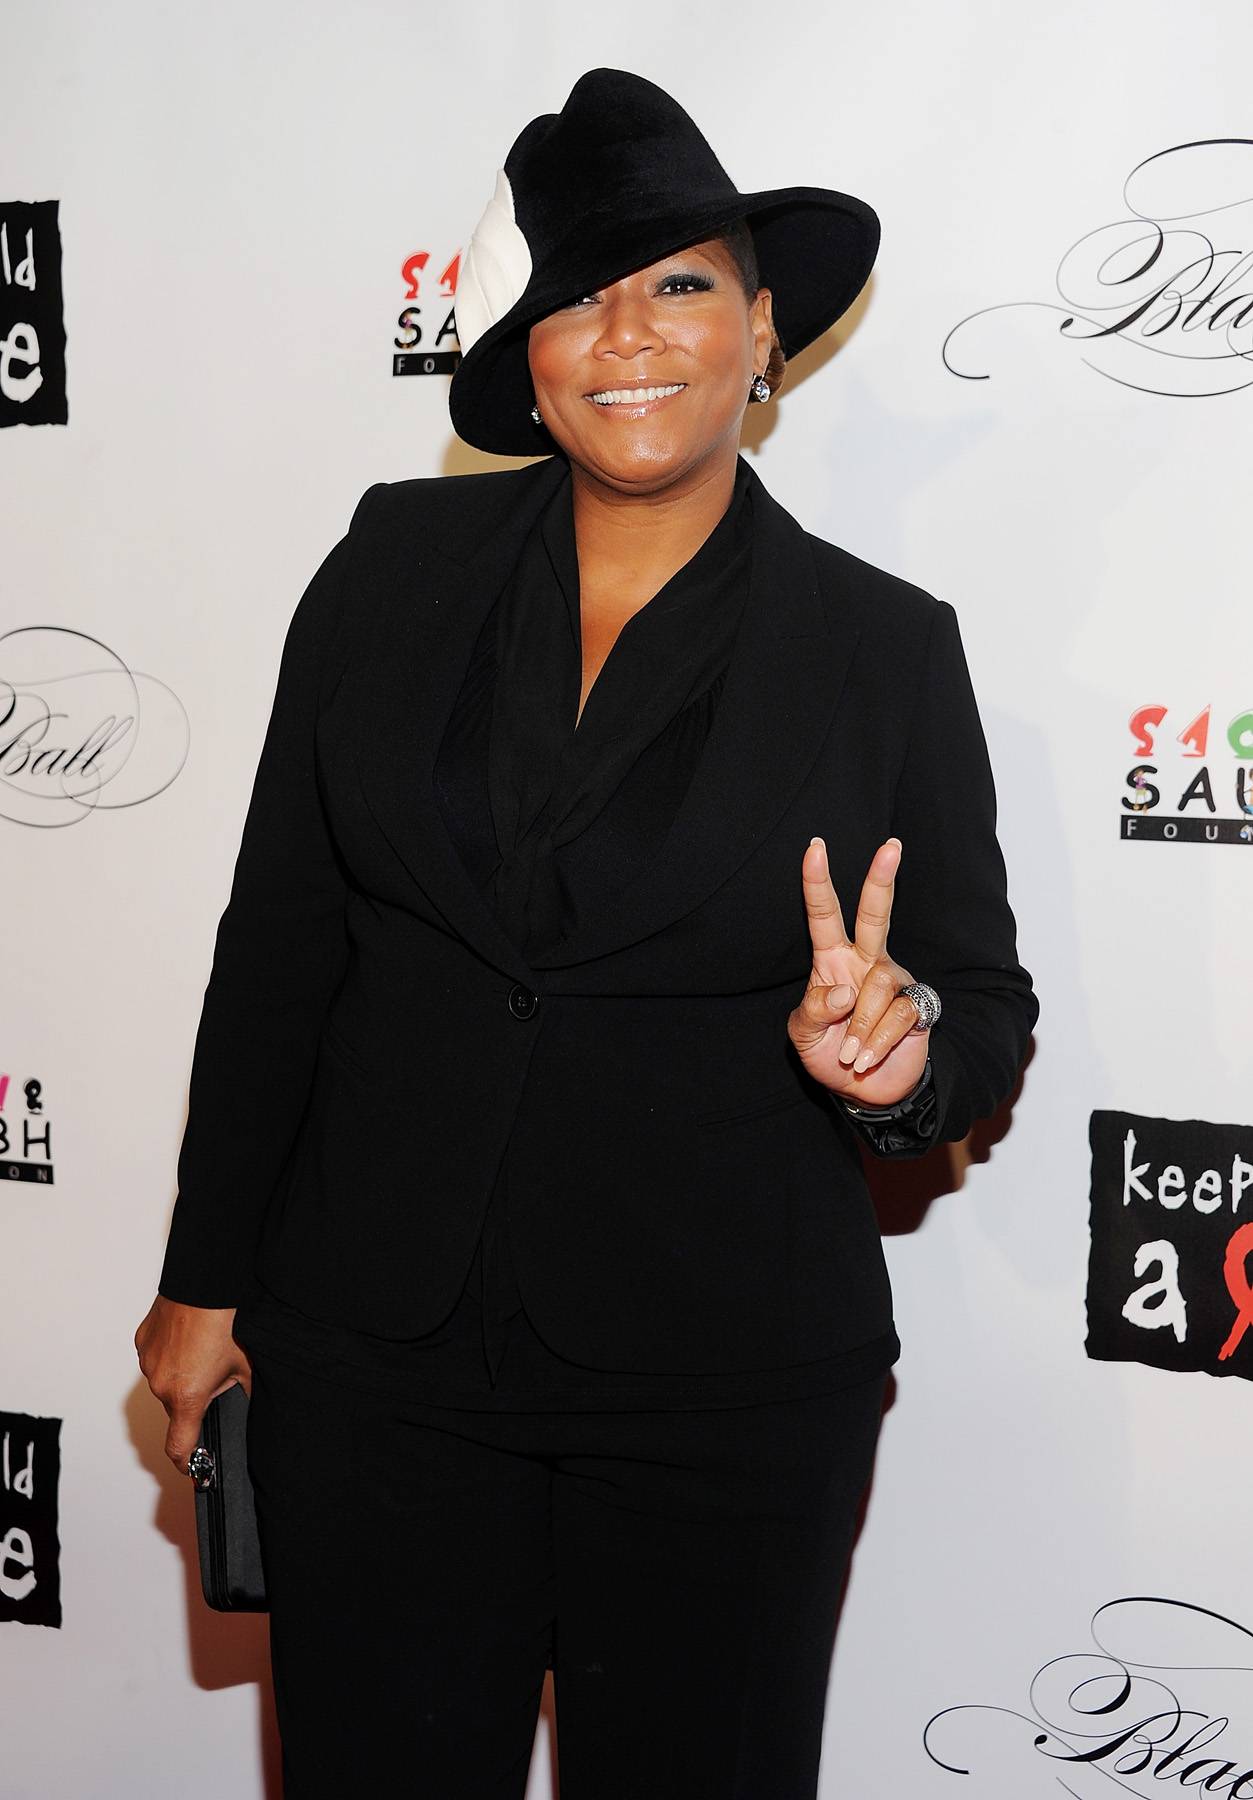 Queen Latifah in Monster's Ball - Halle Berry forgot to thank Queen Latifah — or, at least, her busy schedule — in her acceptance speech at the 2002 Oscars. The Jersey-born rapper had to drop out of the film due to scheduling conflicts, giving Berry the opportunity of a lifetime. Latifah got a second chance at an Academy Award one year later, when she got a Best Supporting Actress nod for Chicago. (Photo: Dimitrios Kambouris/Getty Images)